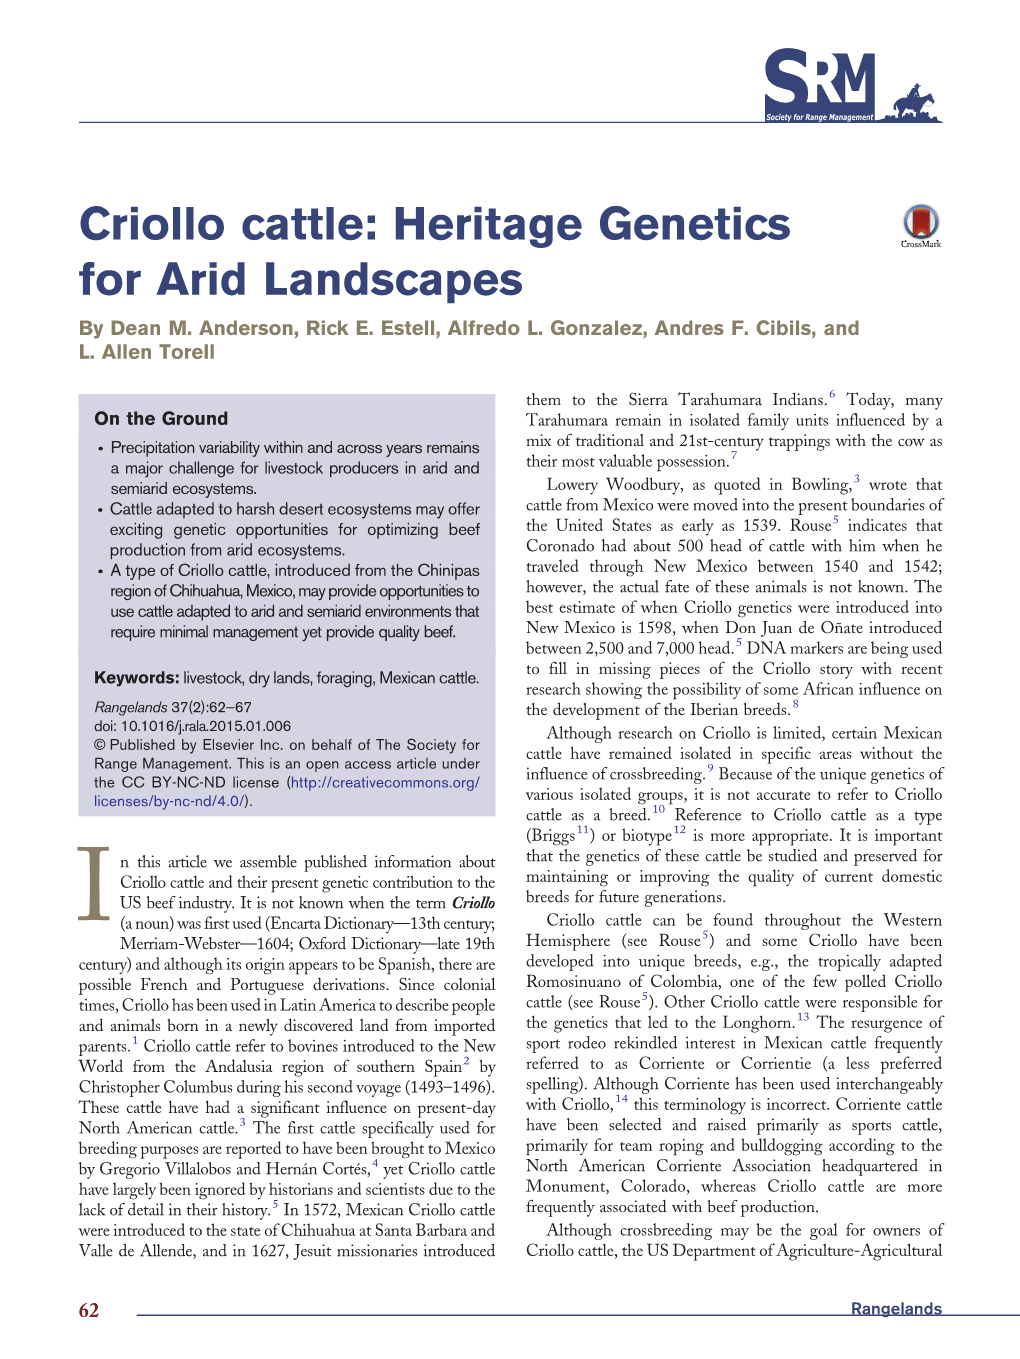 Criollo Cattle: Heritage Genetics for Arid Landscapes by Dean M